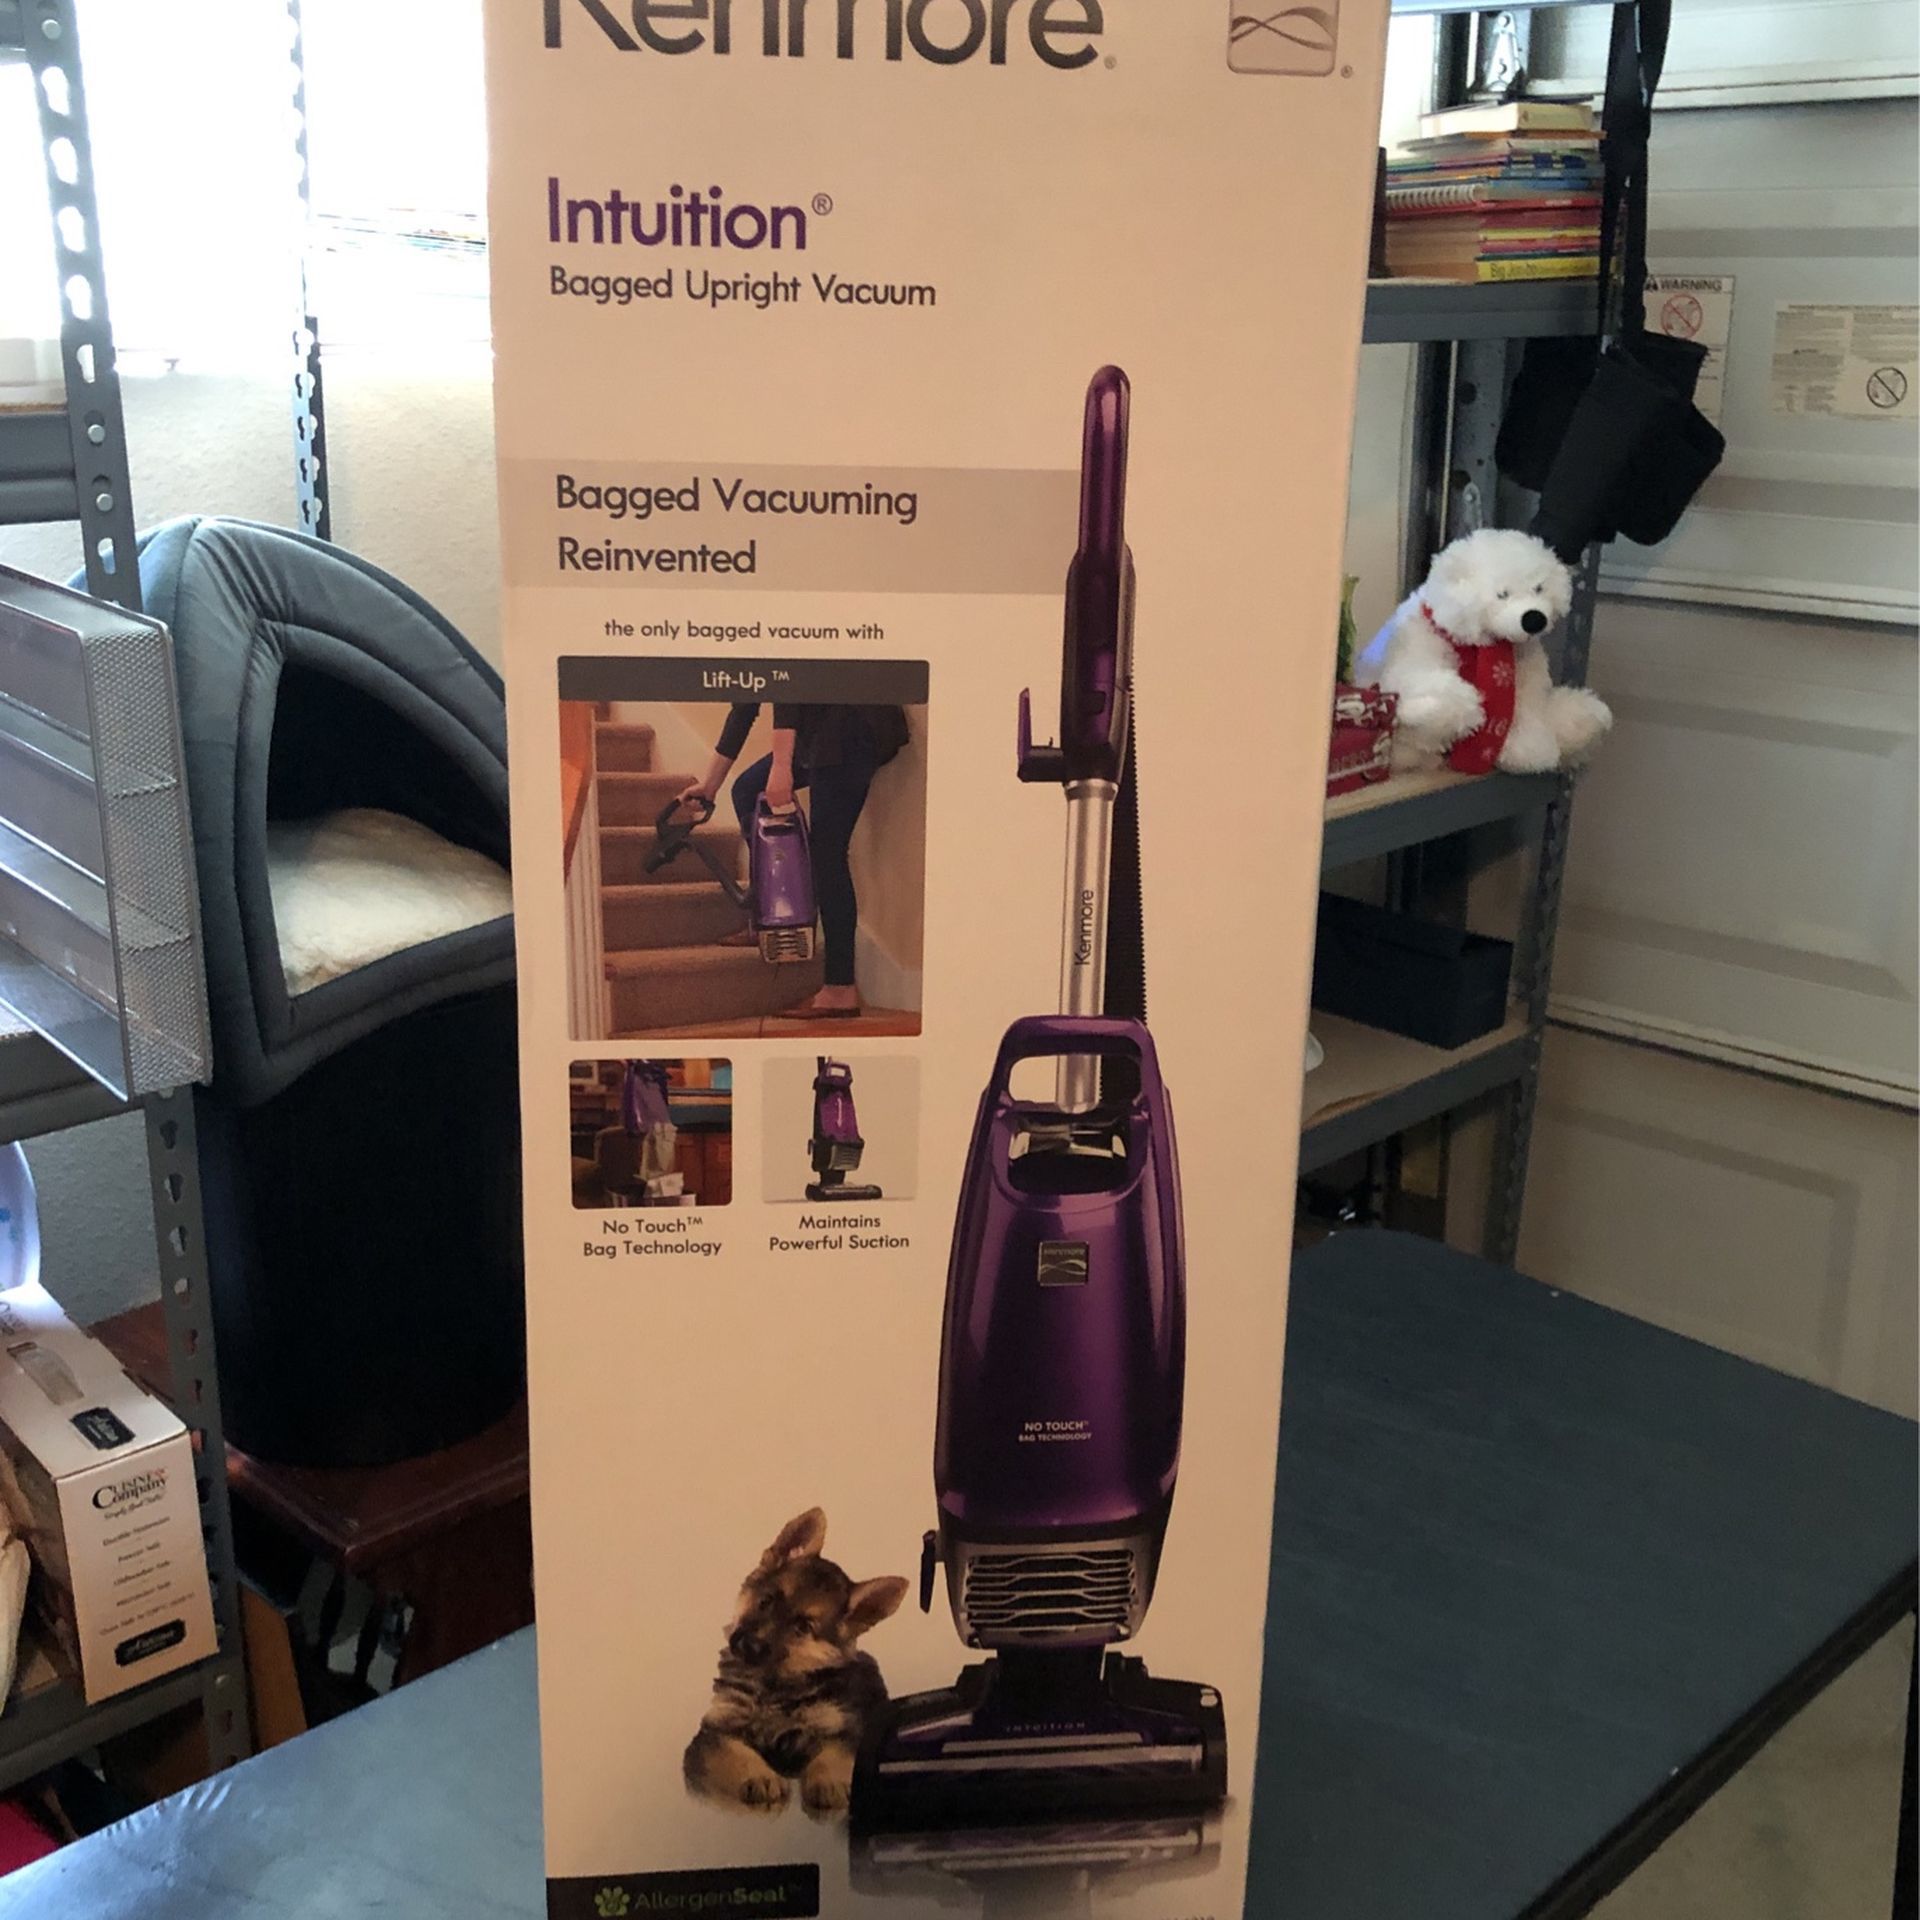 KENMORE Intuition Bagged Upright Vacuum Cleaner with No Touch Bag